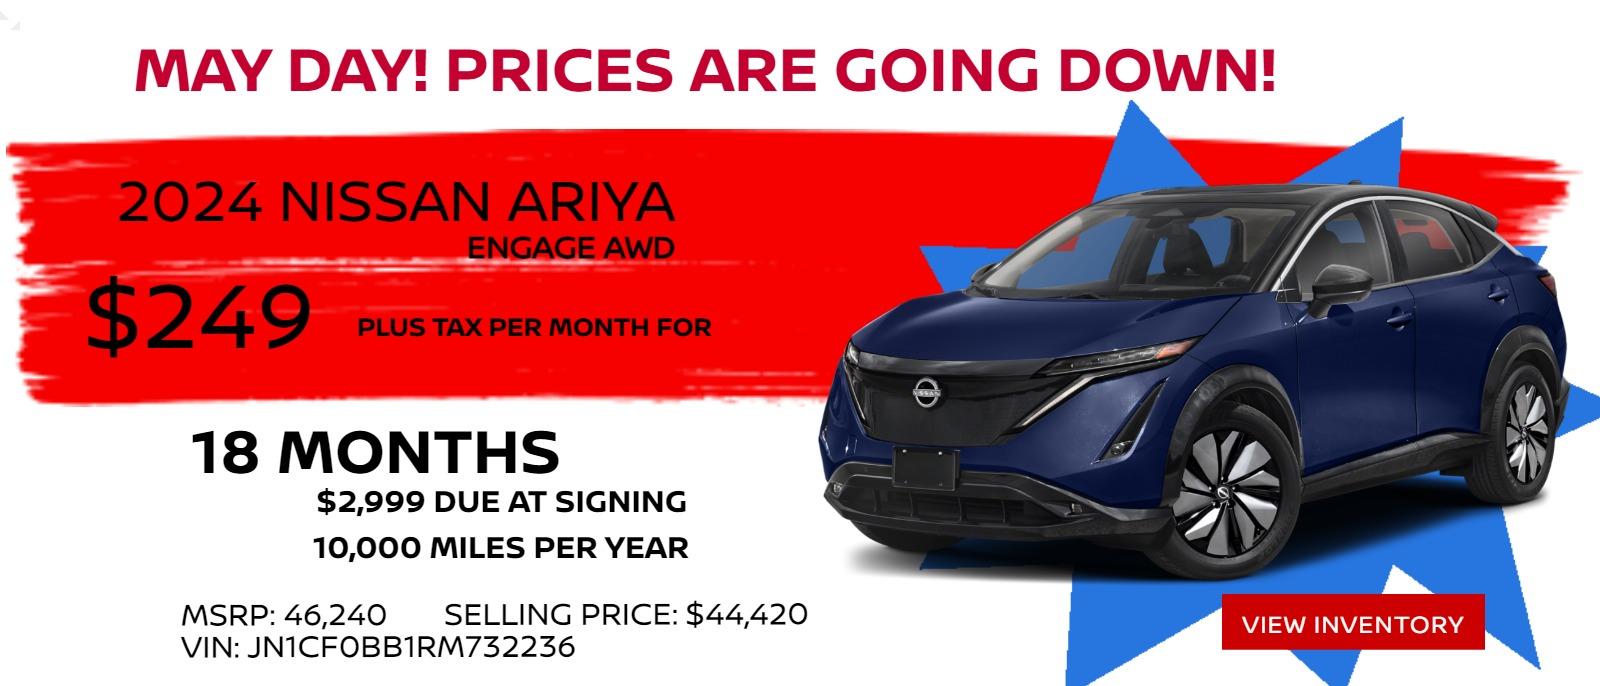 2024 NISSAN ARIYA ENGAGE PLUS AWD STOCK # 24152
MSRP: $46,240
$5,000 DOWN
$299 PER MONTH
18 MONTH LEASE/ 10K PER YEAR
Selling price: $44,420